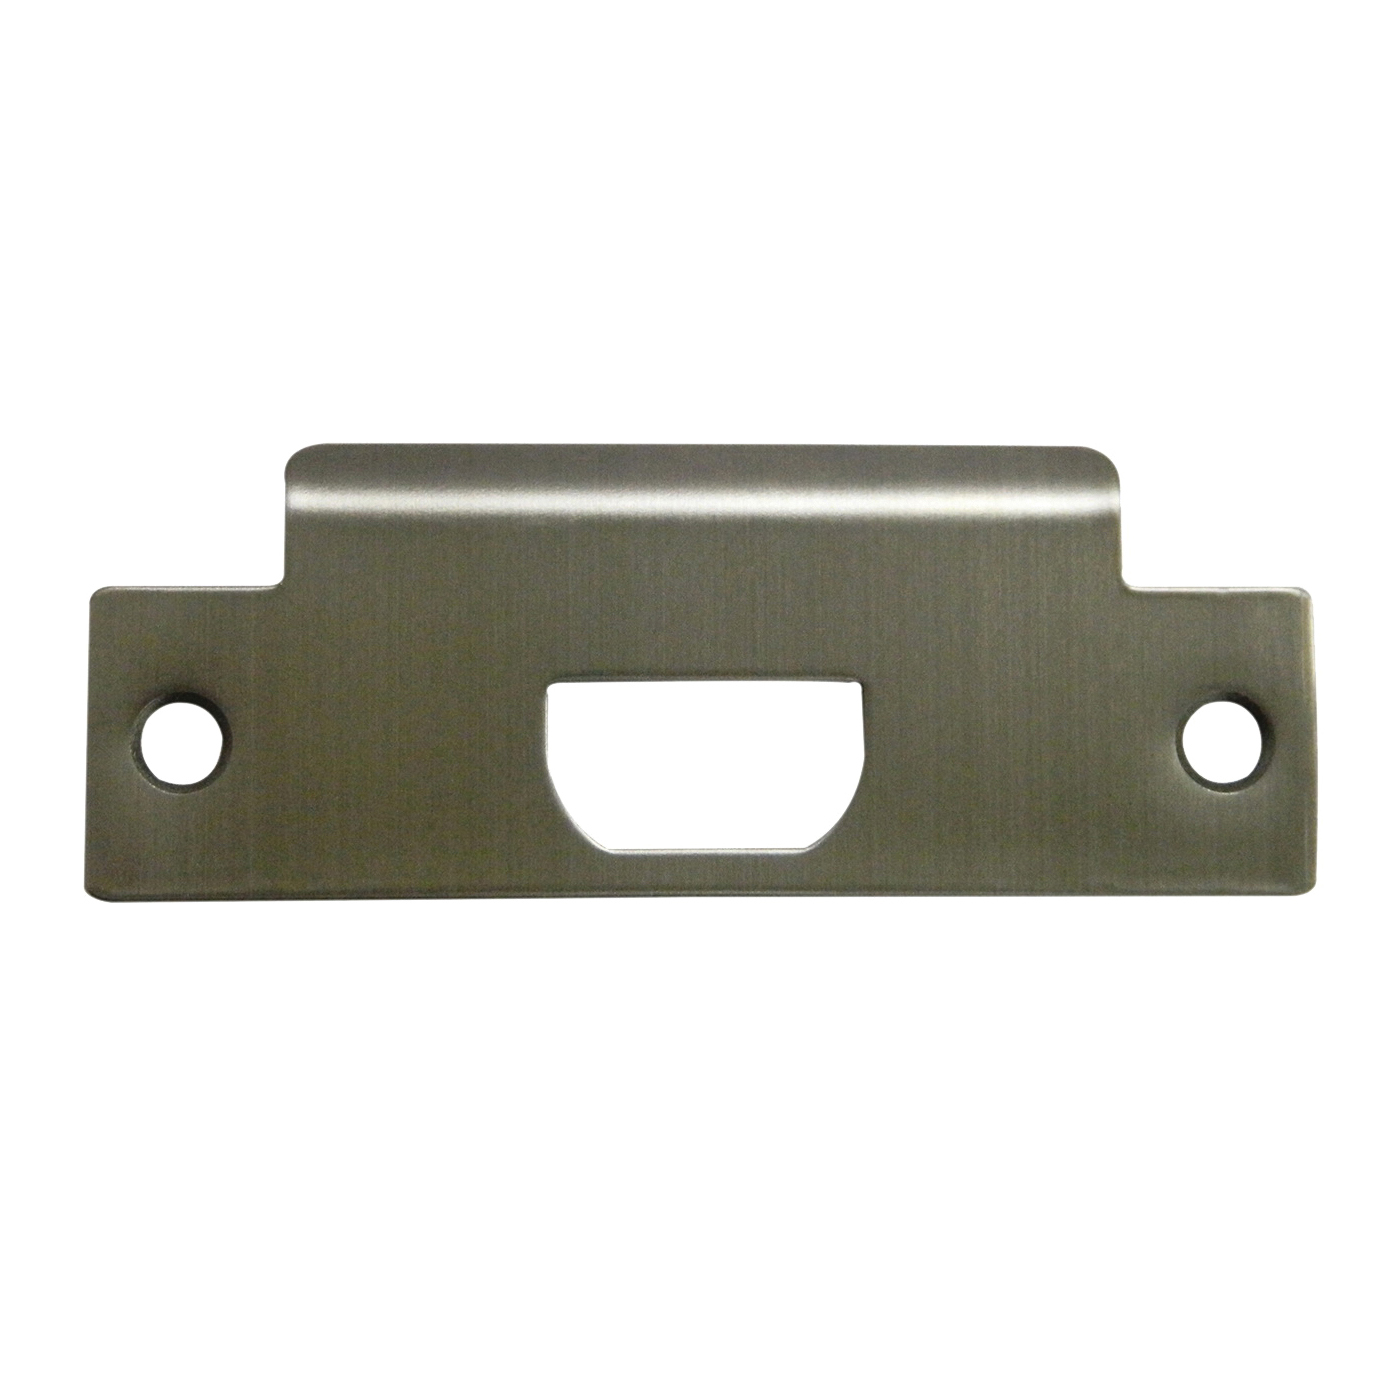 006-C08690V36-PS T-Strike Plate, Stainless Steel